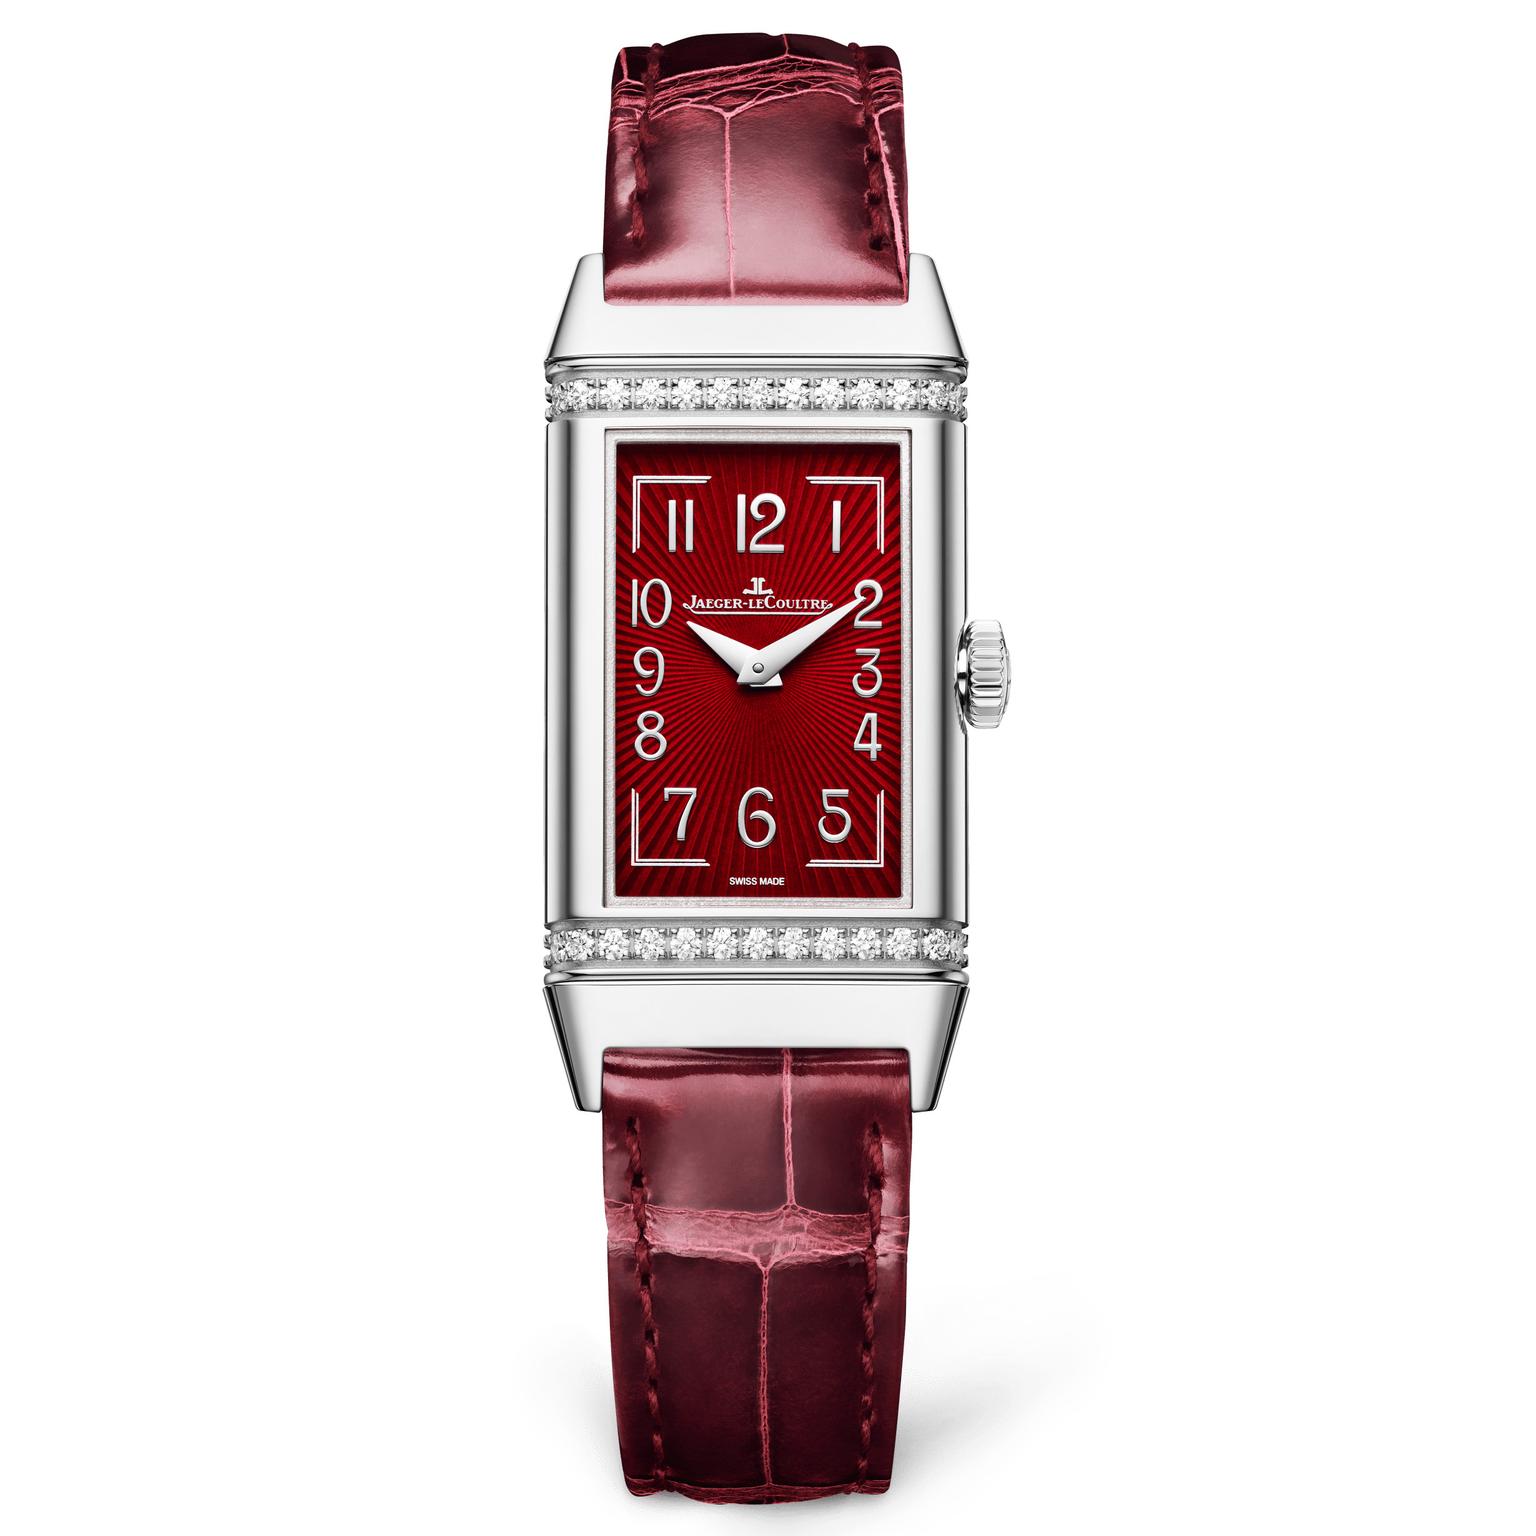 Jaeger-LeCoultre Reverso One on white backgound